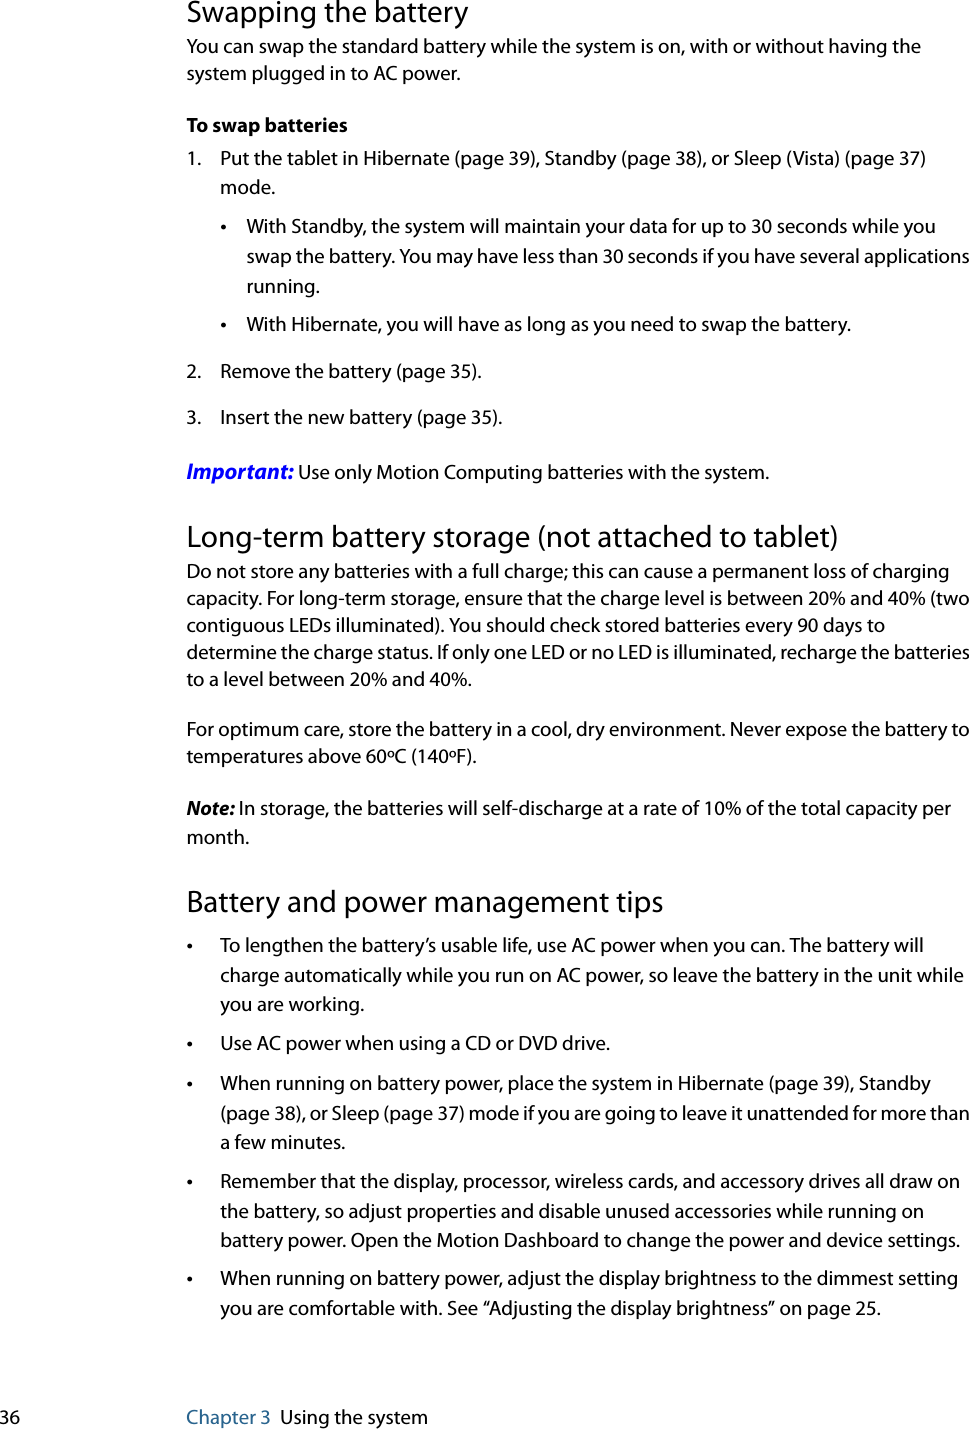 36 Chapter 3 Using the systemSwapping the batteryYou can swap the standard battery while the system is on, with or without having the system plugged in to AC power.To swap batteries1. Put the tablet in Hibernate (page 39), Standby (page 38), or Sleep (Vista) (page 37) mode.•With Standby, the system will maintain your data for up to 30 seconds while you swap the battery. You may have less than 30 seconds if you have several applications running.•With Hibernate, you will have as long as you need to swap the battery.2. Remove the battery (page 35).3. Insert the new battery (page 35).Important: Use only Motion Computing batteries with the system.Long-term battery storage (not attached to tablet)Do not store any batteries with a full charge; this can cause a permanent loss of charging capacity. For long-term storage, ensure that the charge level is between 20% and 40% (two contiguous LEDs illuminated). You should check stored batteries every 90 days to determine the charge status. If only one LED or no LED is illuminated, recharge the batteries to a level between 20% and 40%.For optimum care, store the battery in a cool, dry environment. Never expose the battery to temperatures above 60ºC (140ºF).Note: In storage, the batteries will self-discharge at a rate of 10% of the total capacity per month.Battery and power management tips•To lengthen the battery’s usable life, use AC power when you can. The battery will charge automatically while you run on AC power, so leave the battery in the unit while you are working.•Use AC power when using a CD or DVD drive.•When running on battery power, place the system in Hibernate (page 39), Standby (page 38), or Sleep (page 37) mode if you are going to leave it unattended for more than a few minutes.•Remember that the display, processor, wireless cards, and accessory drives all draw on the battery, so adjust properties and disable unused accessories while running on battery power. Open the Motion Dashboard to change the power and device settings.•When running on battery power, adjust the display brightness to the dimmest setting you are comfortable with. See “Adjusting the display brightness” on page 25.